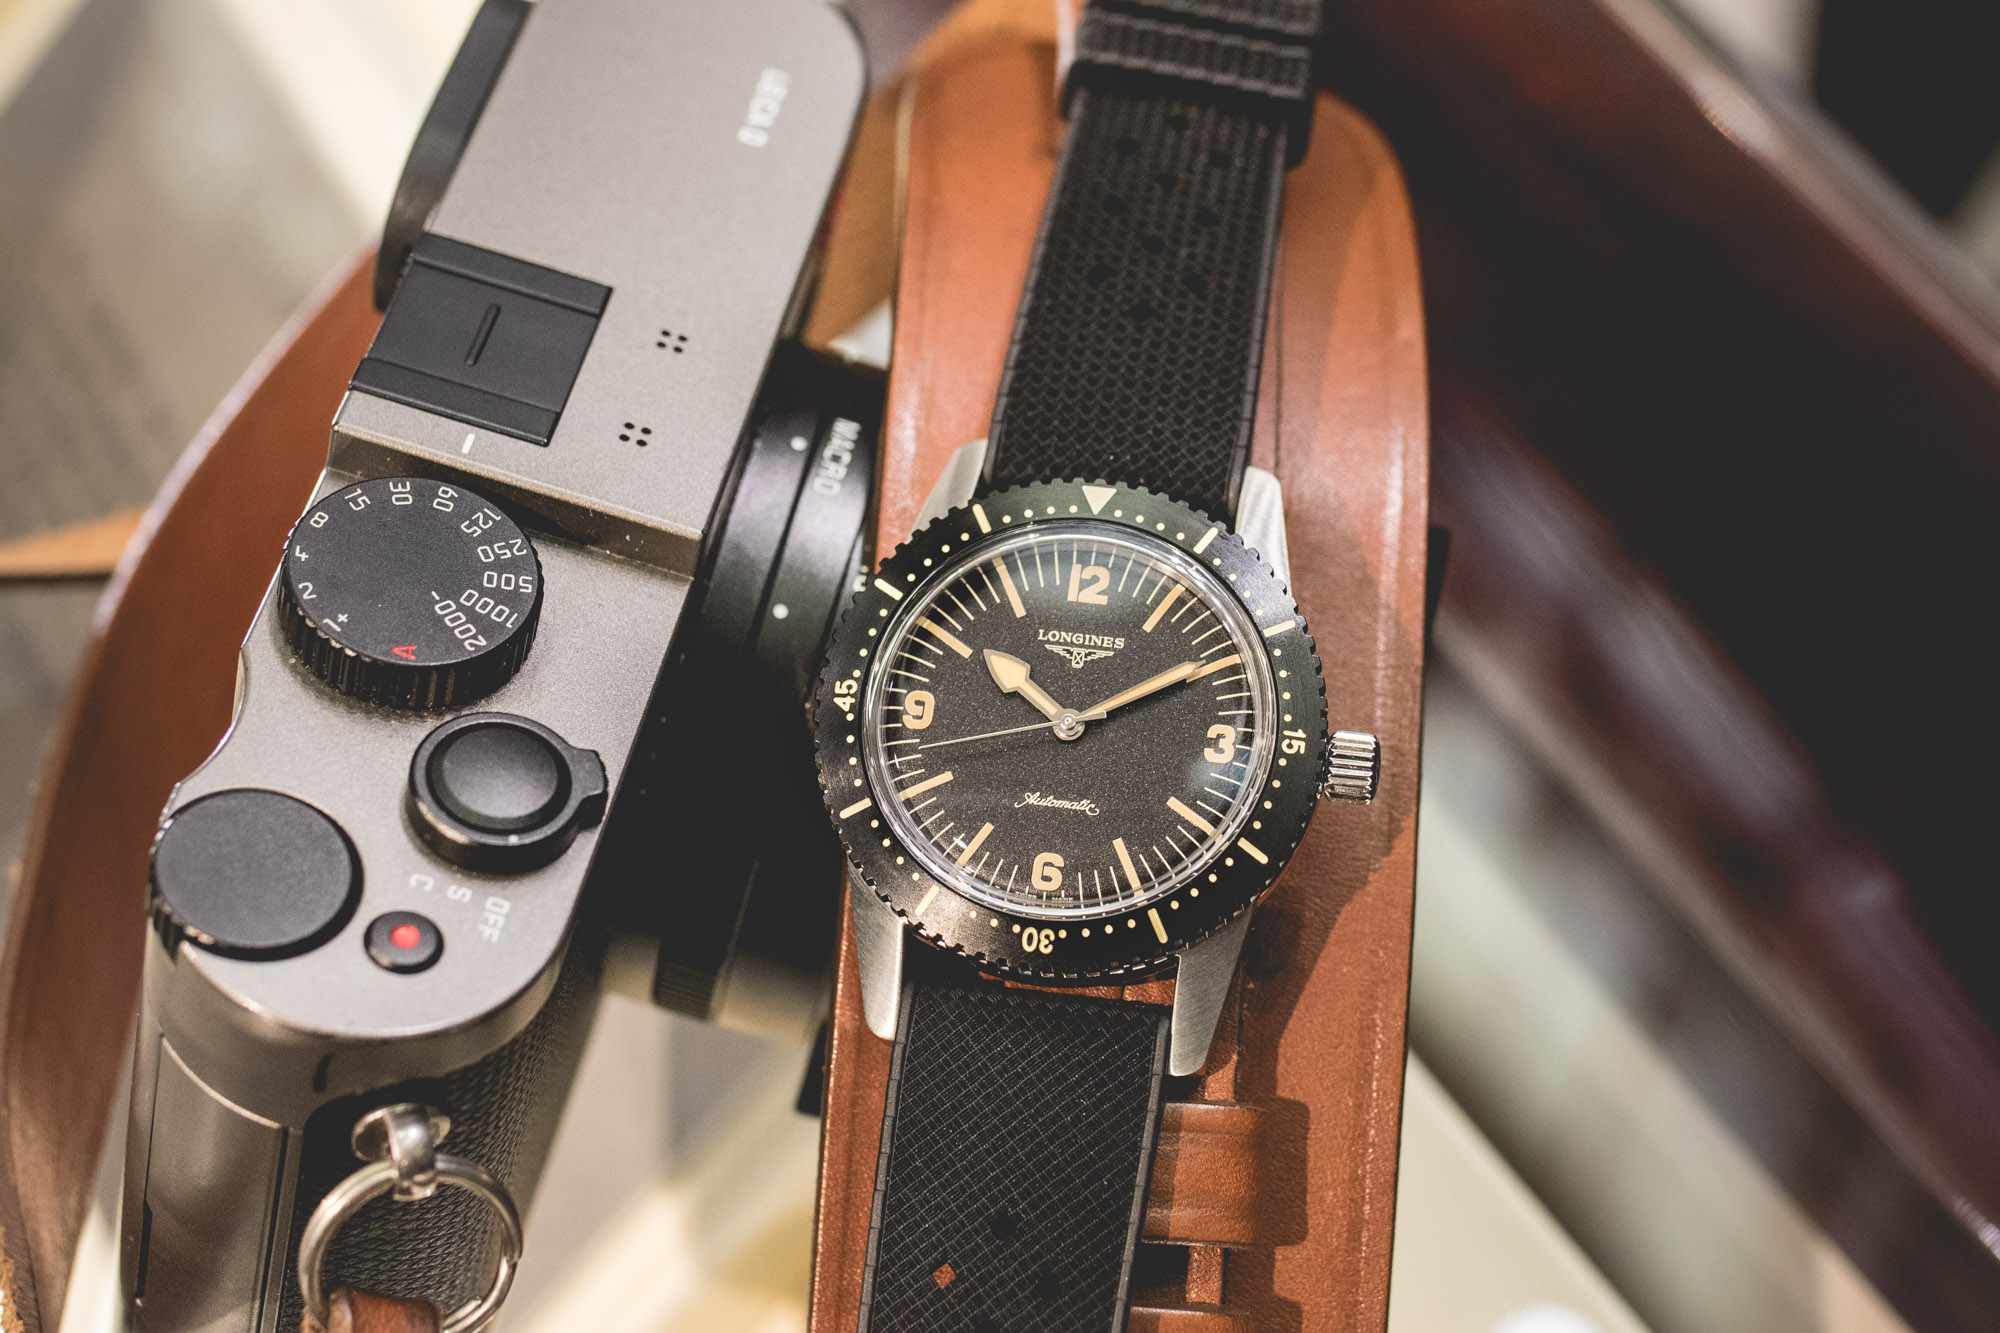 Baselworld 2018 - Longines Heritage Skin Diver Watch